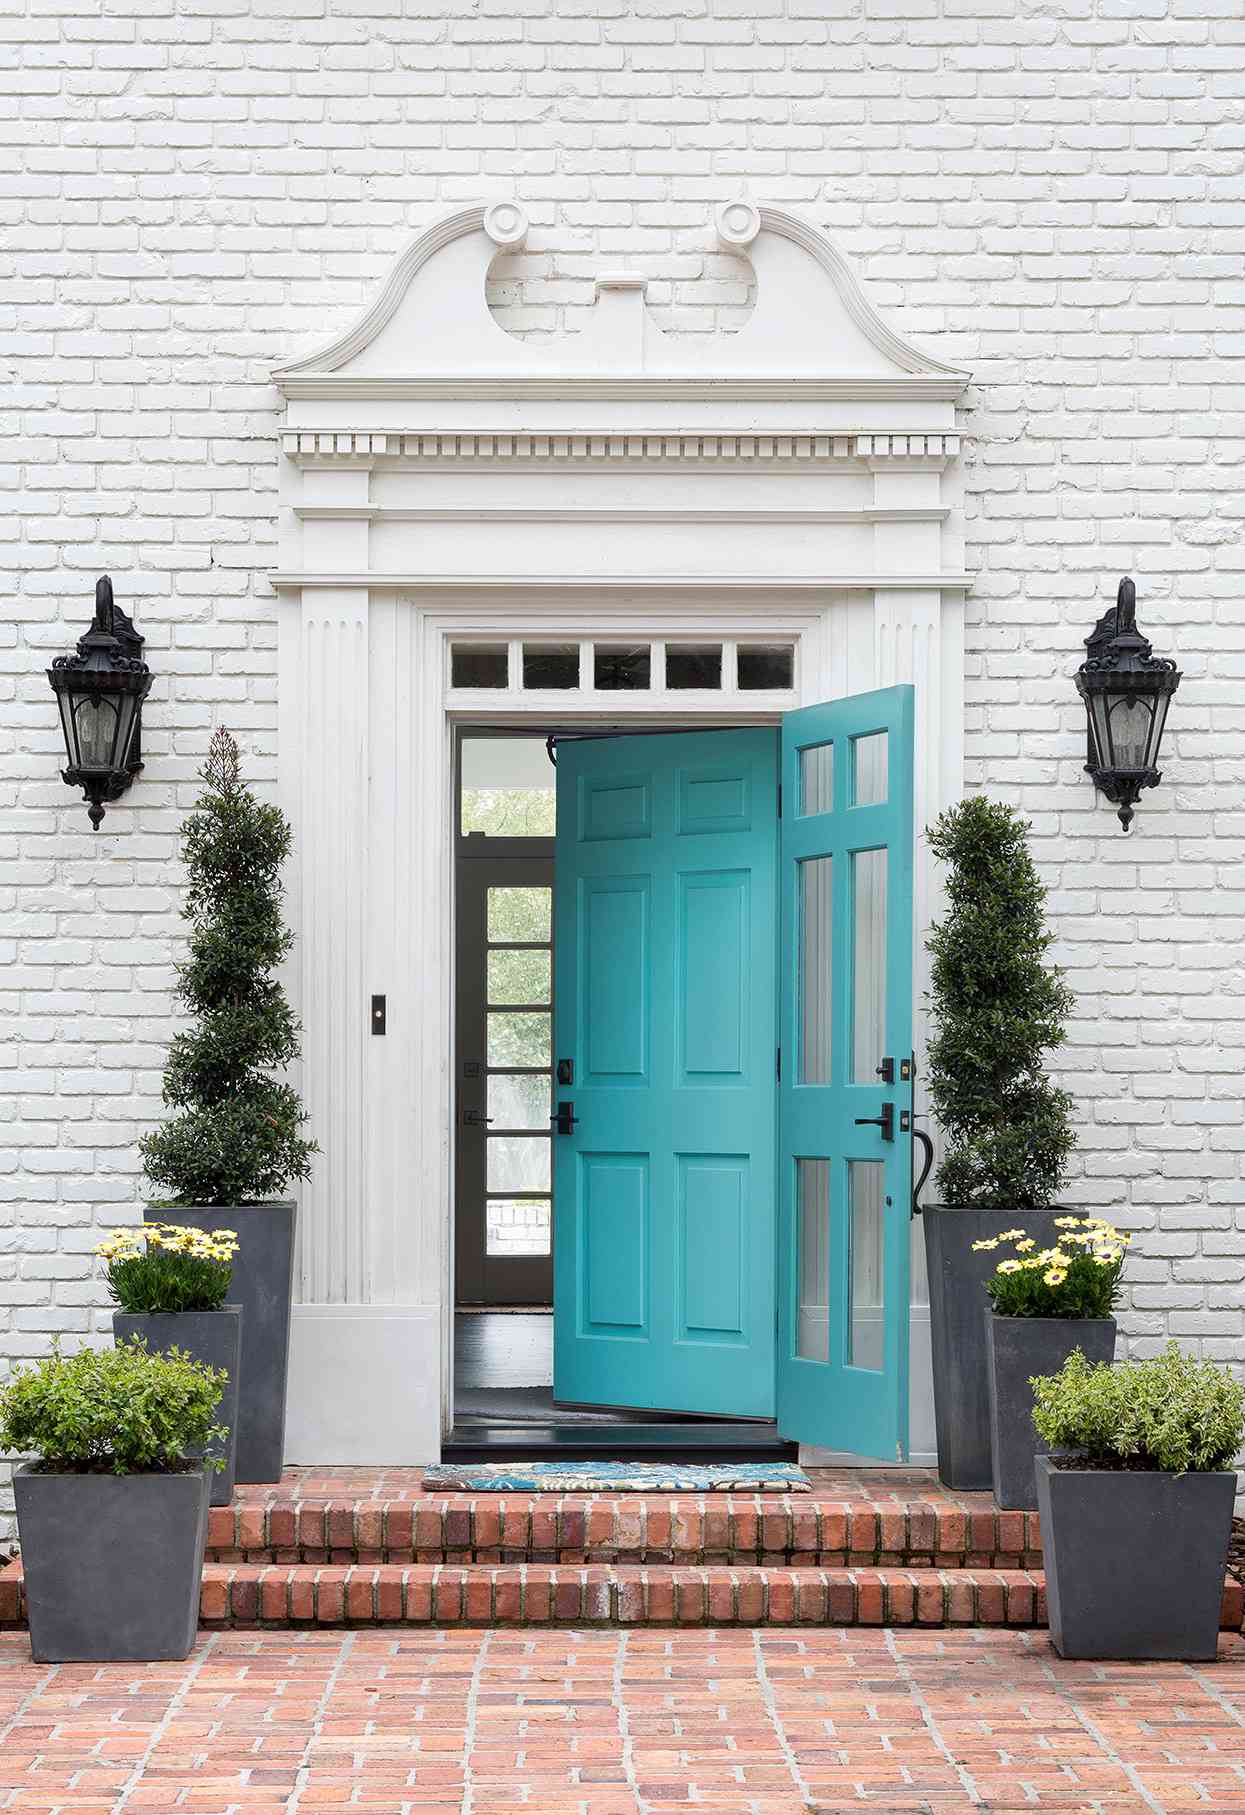 painted white brick exterior with ornate trim and turquoise front door